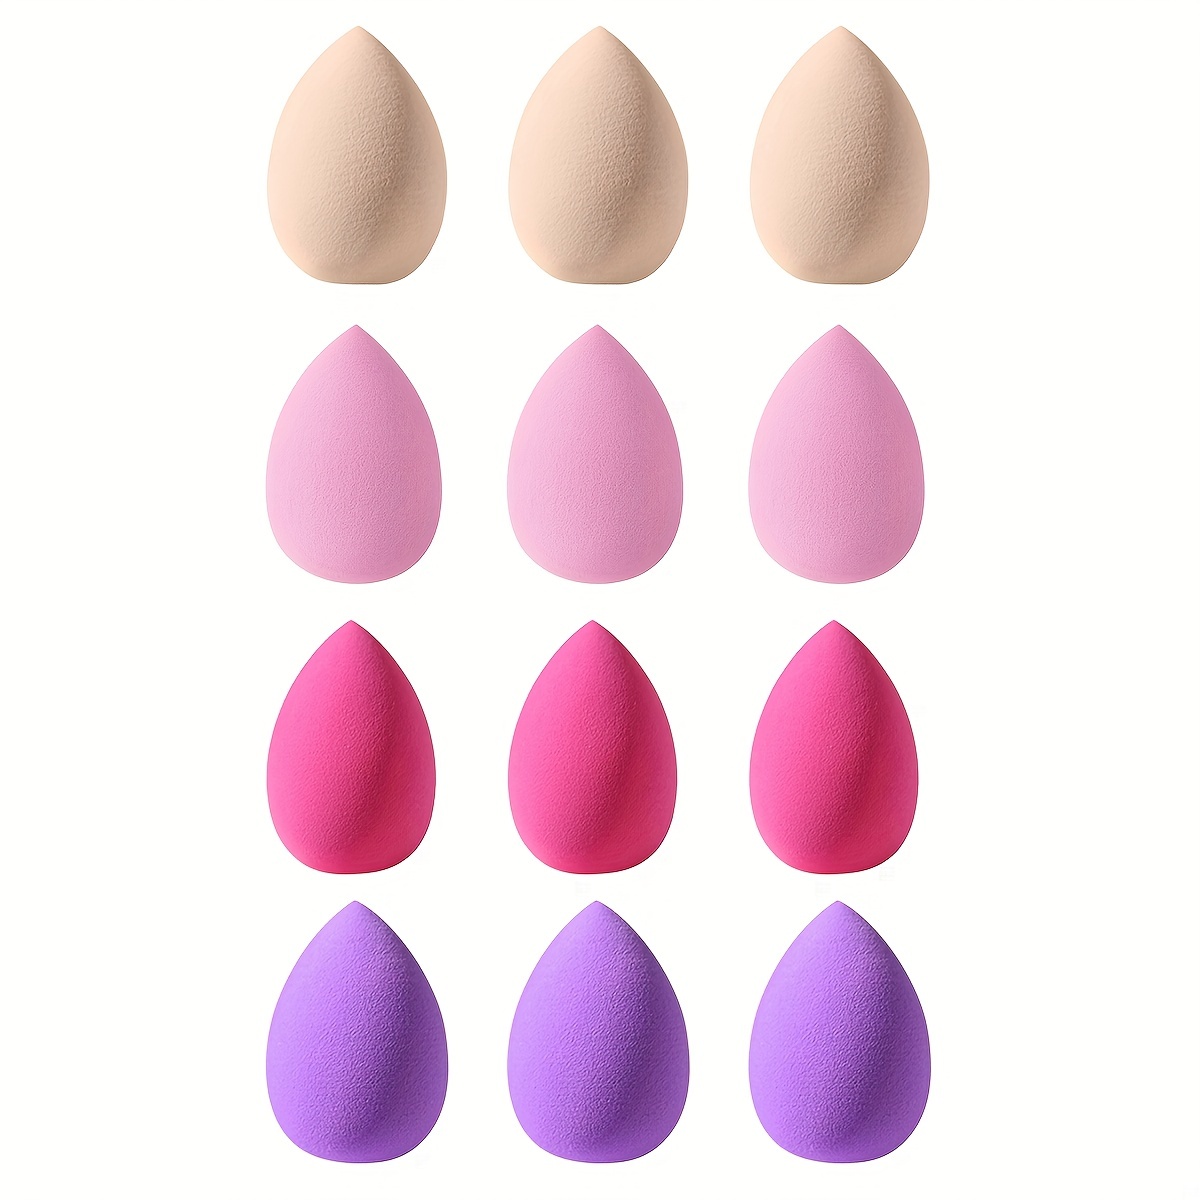 

12pcs Mini Beauty Blender Sponge For Foundation Powder Concealer Eye Shadow Under Eyes Highlight And Contour, Facial Makeup Tools For Beginners - Waterdrop